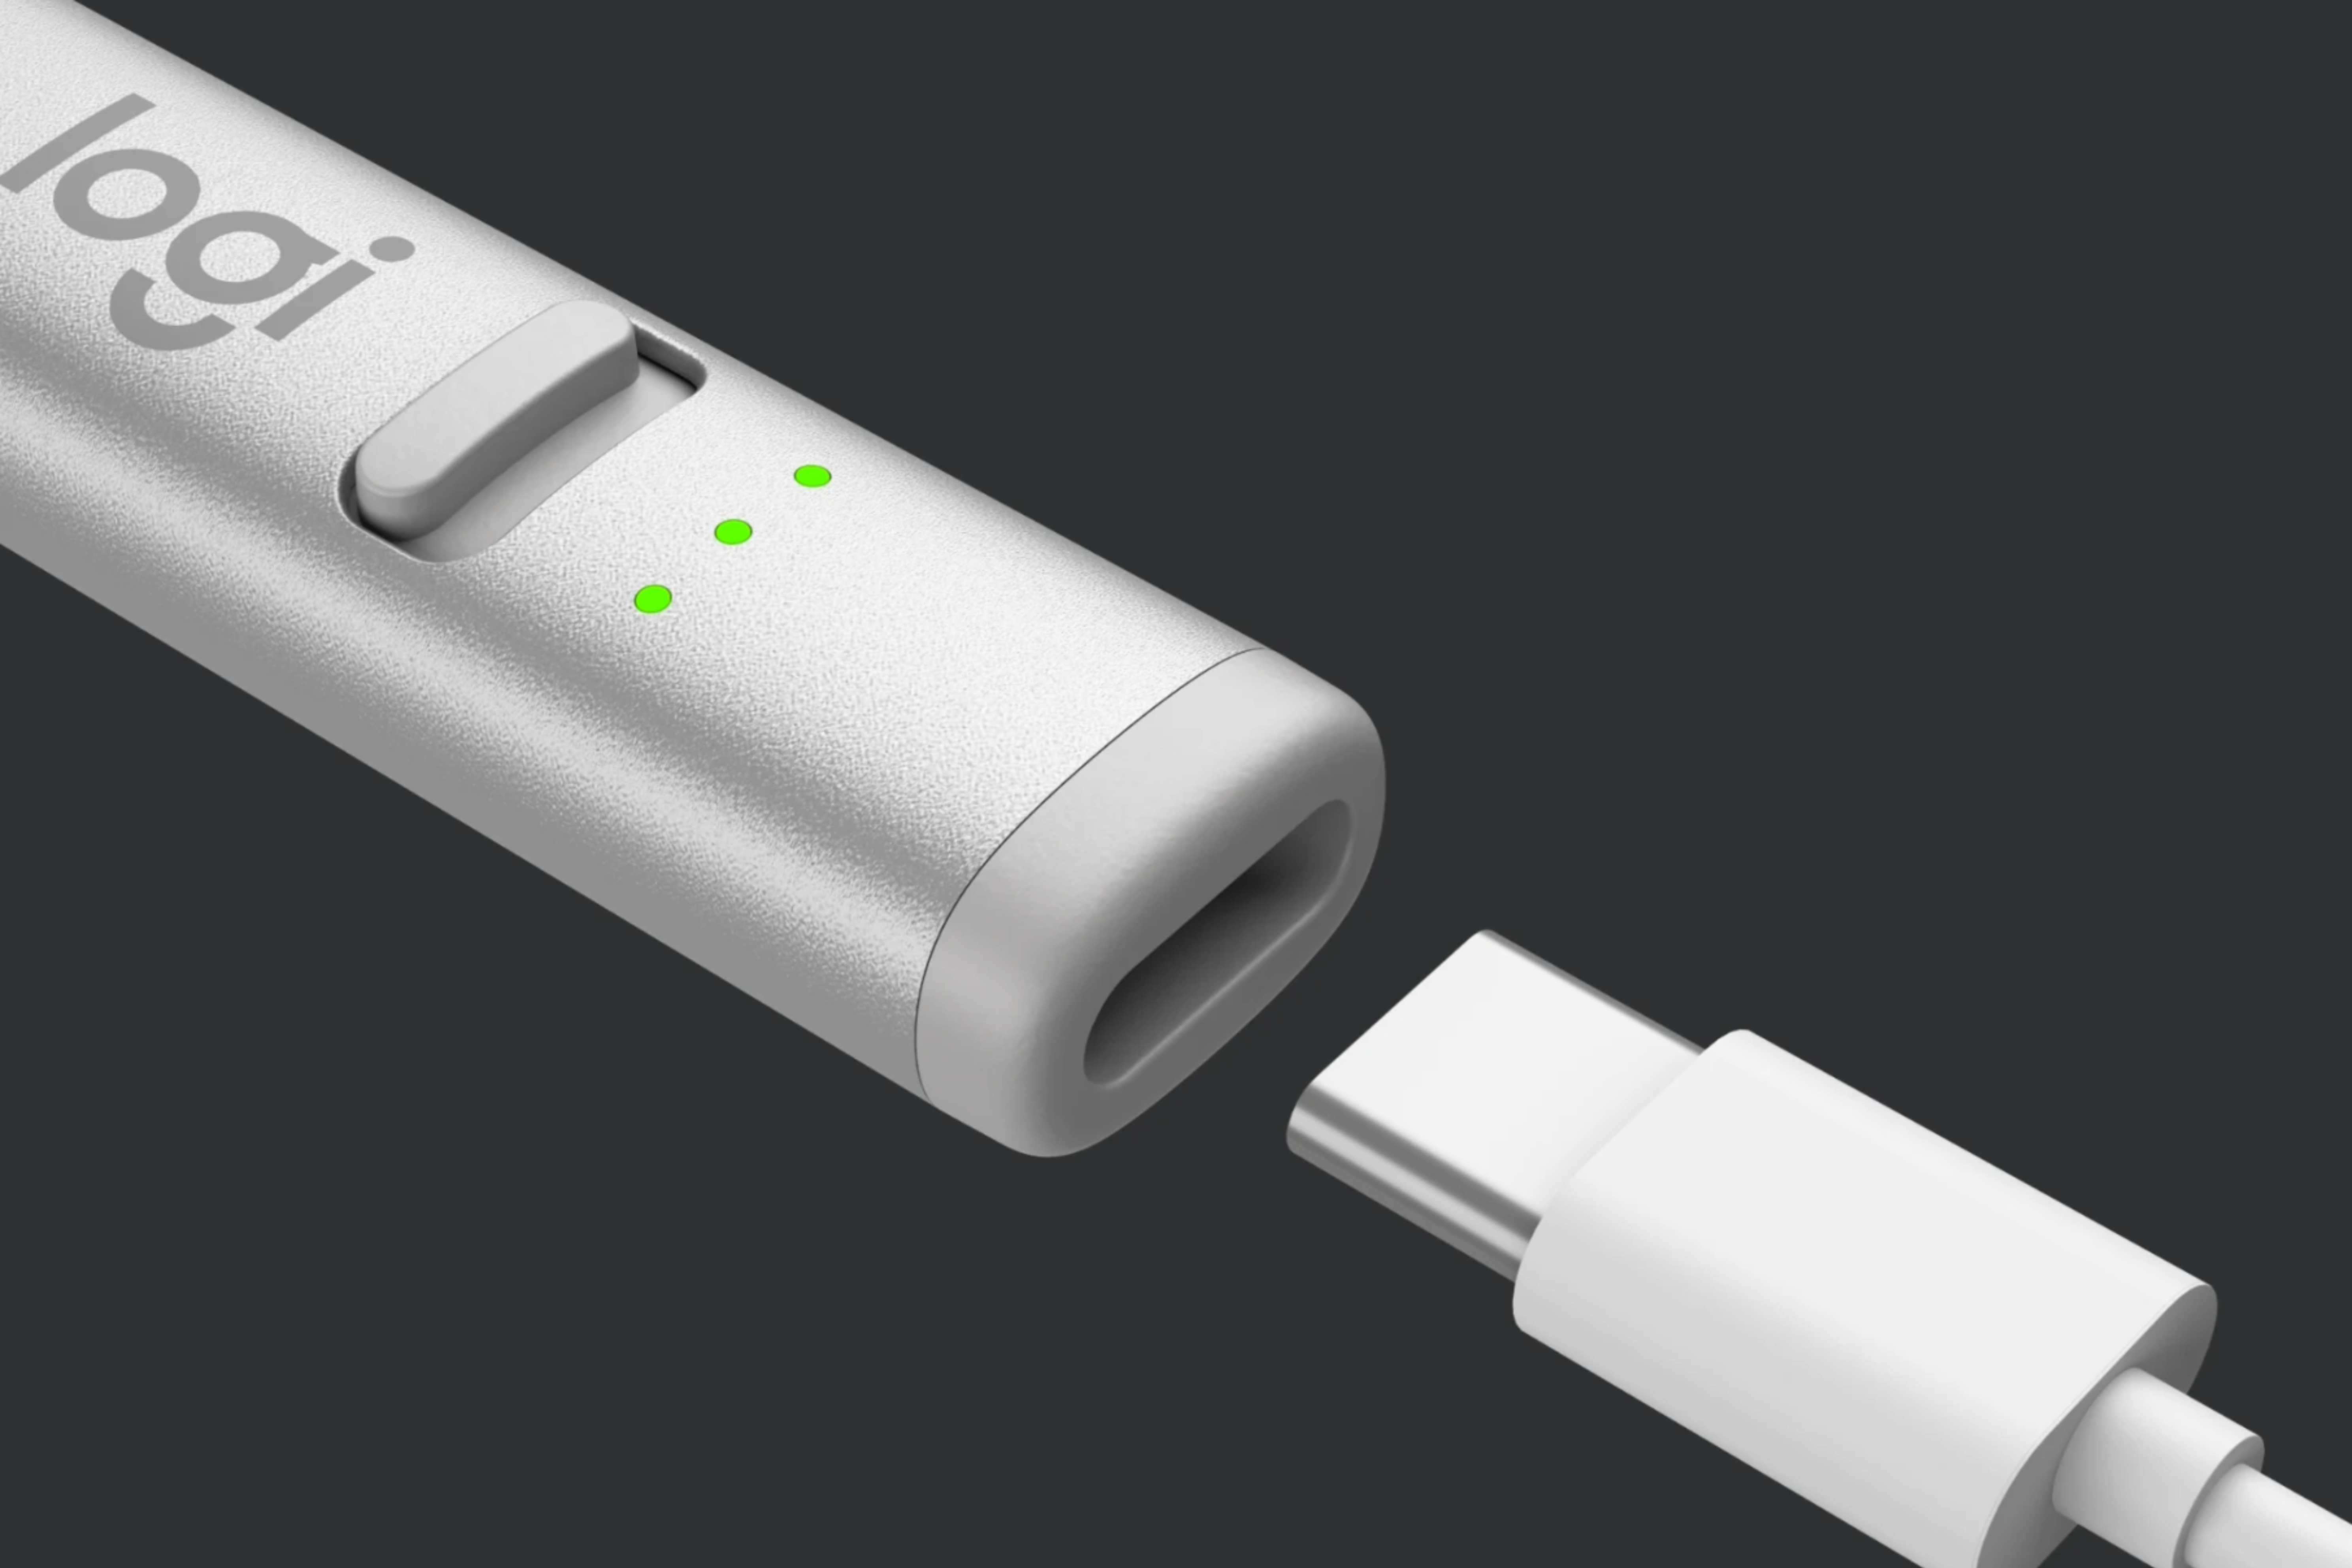 The Logitech Crayon's USB-C port with a USB-C cable.